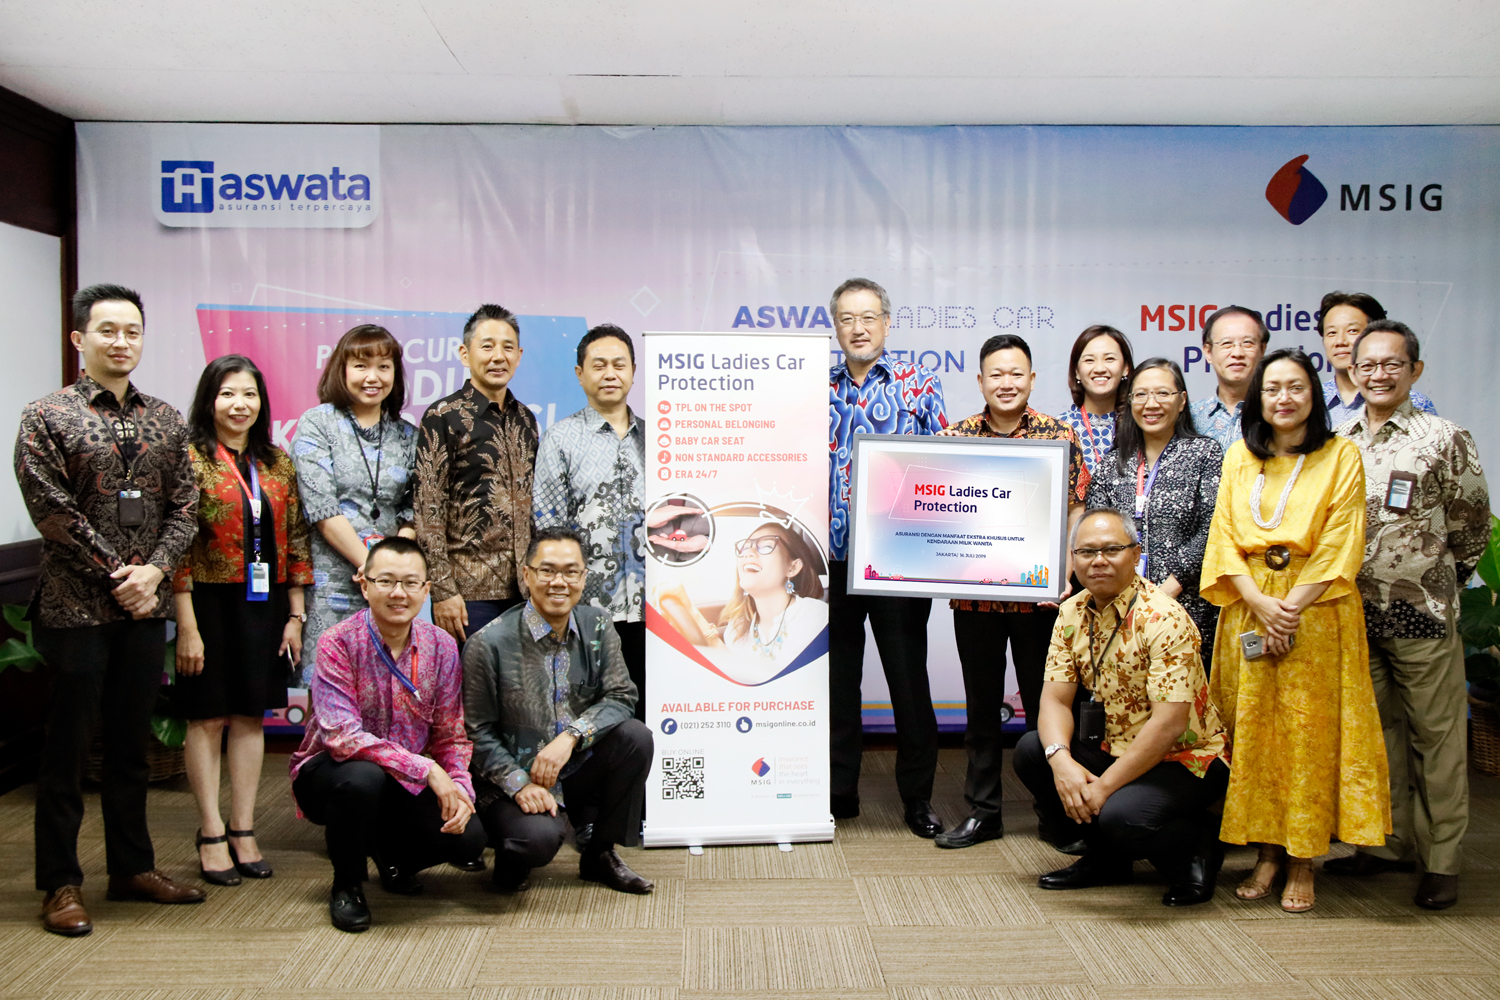 Bringing you the first woman’s car ownership insurance in Indonesia